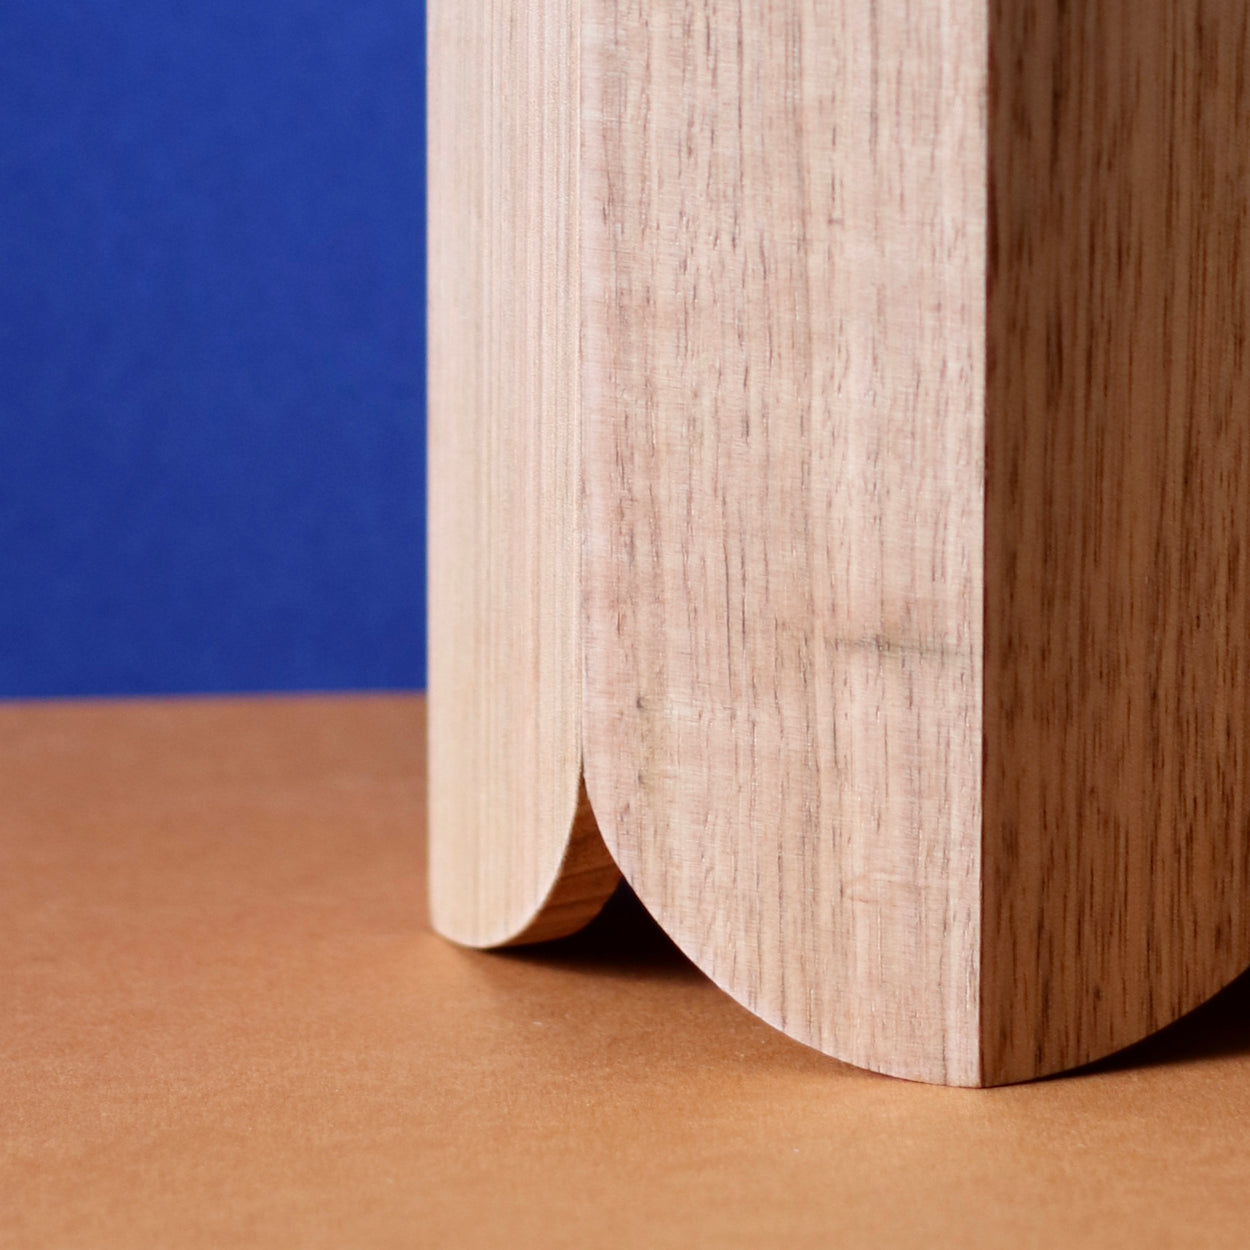 Close Up of Handmade Wood Kitchen Utensil Holder in oak against a blue and brown background.